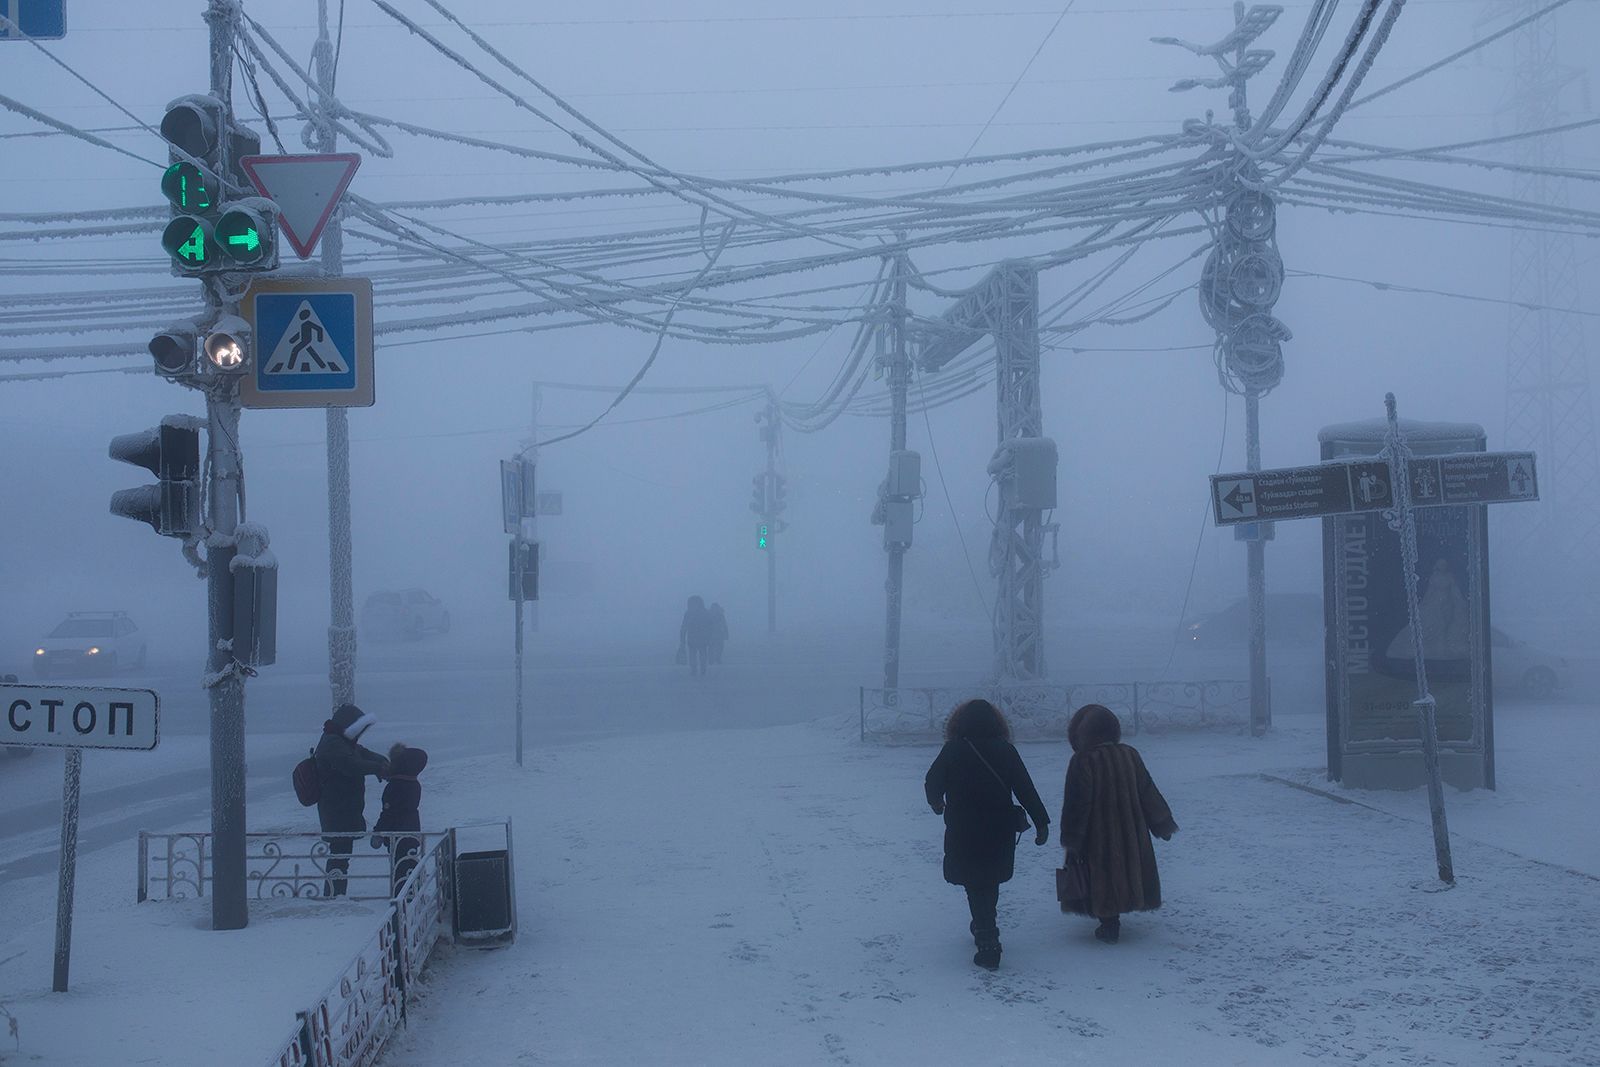 Siberia Is Being Clobbered With Snow Already, and That Could Mean a Harsher  U.S. Winter Ahead